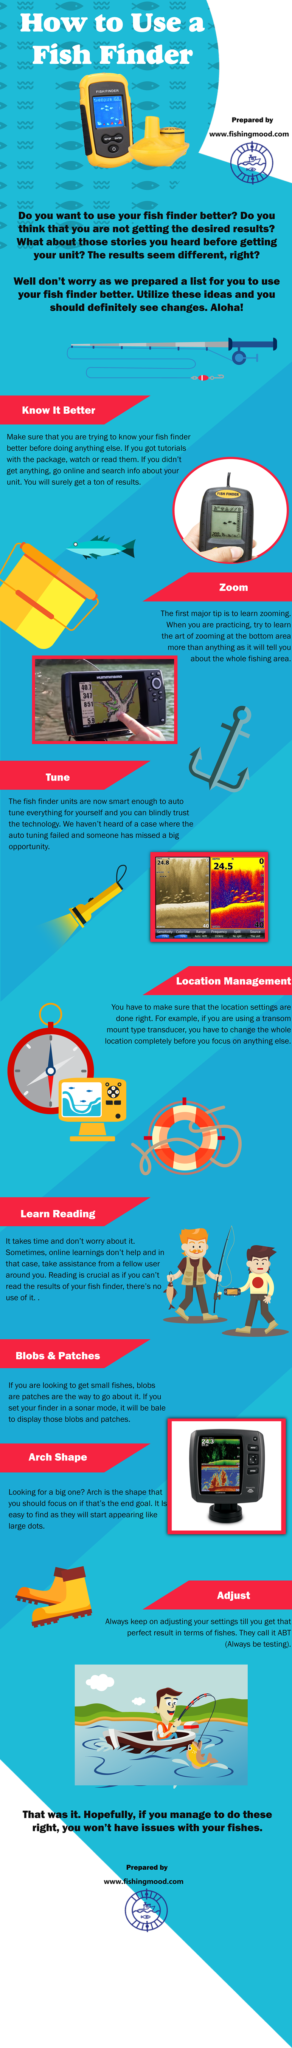 infographic how to use a fish finder